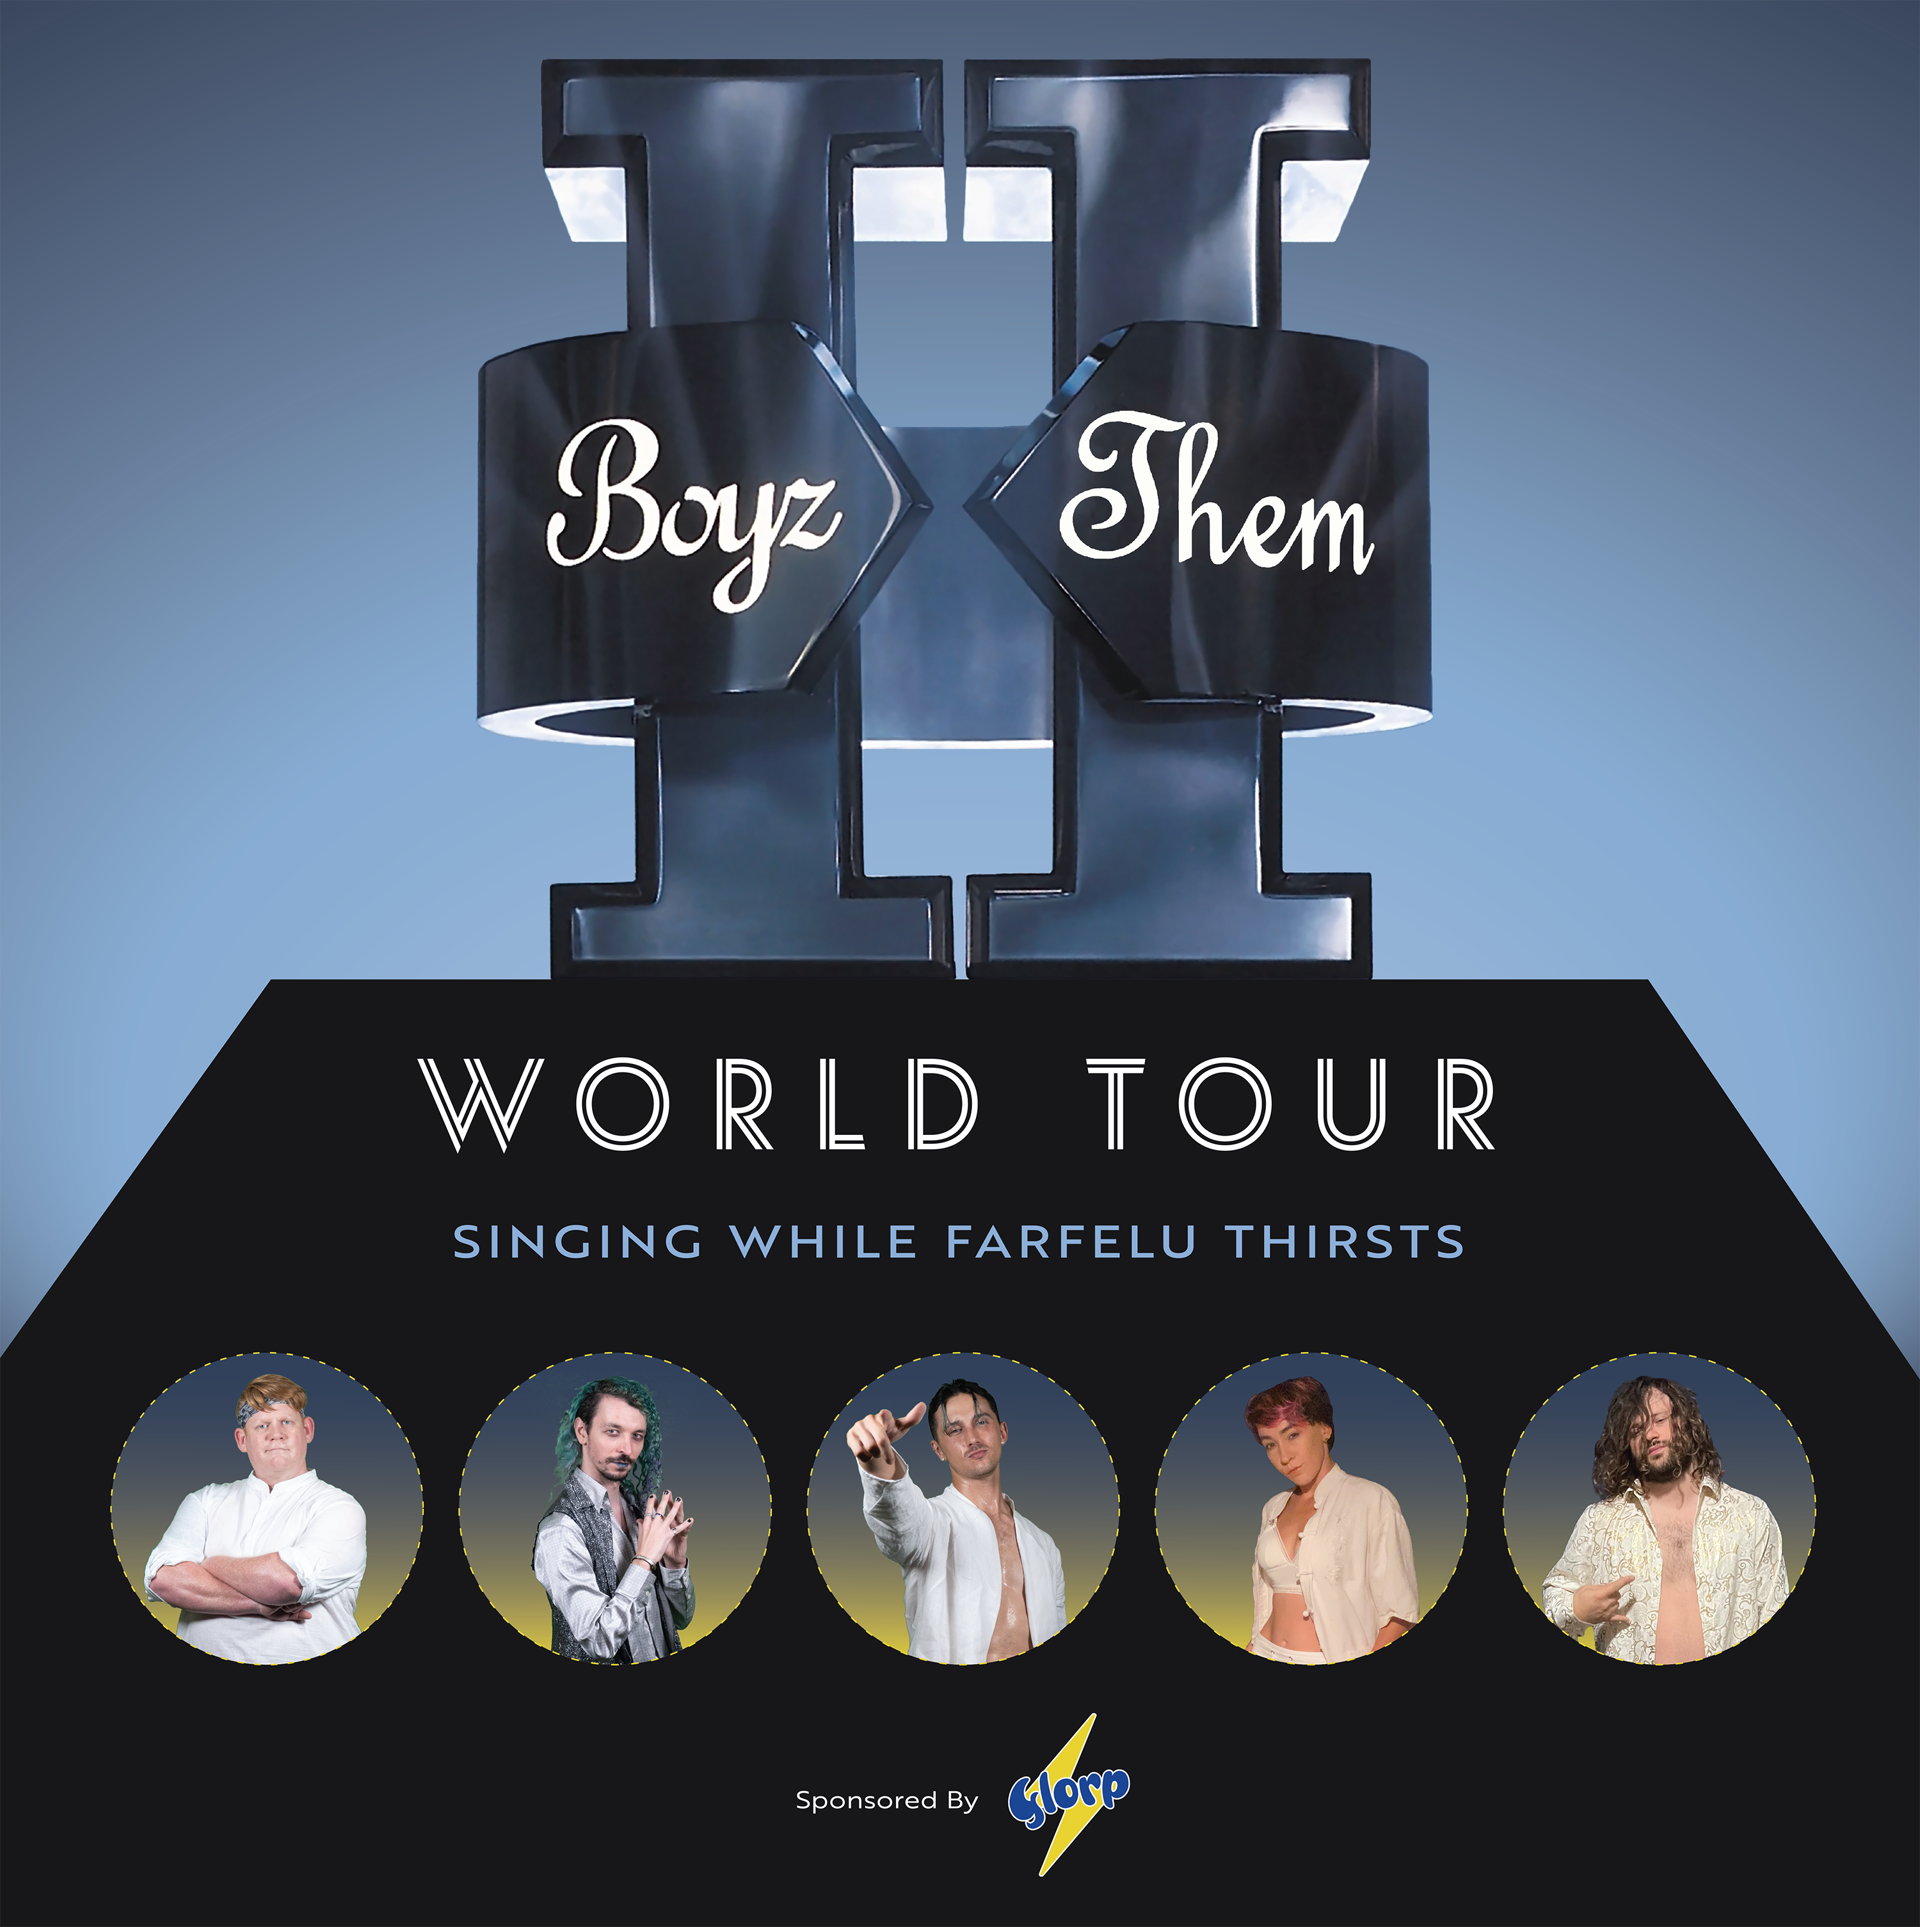 Boyz iI Them Poster - Link to YouTube videos